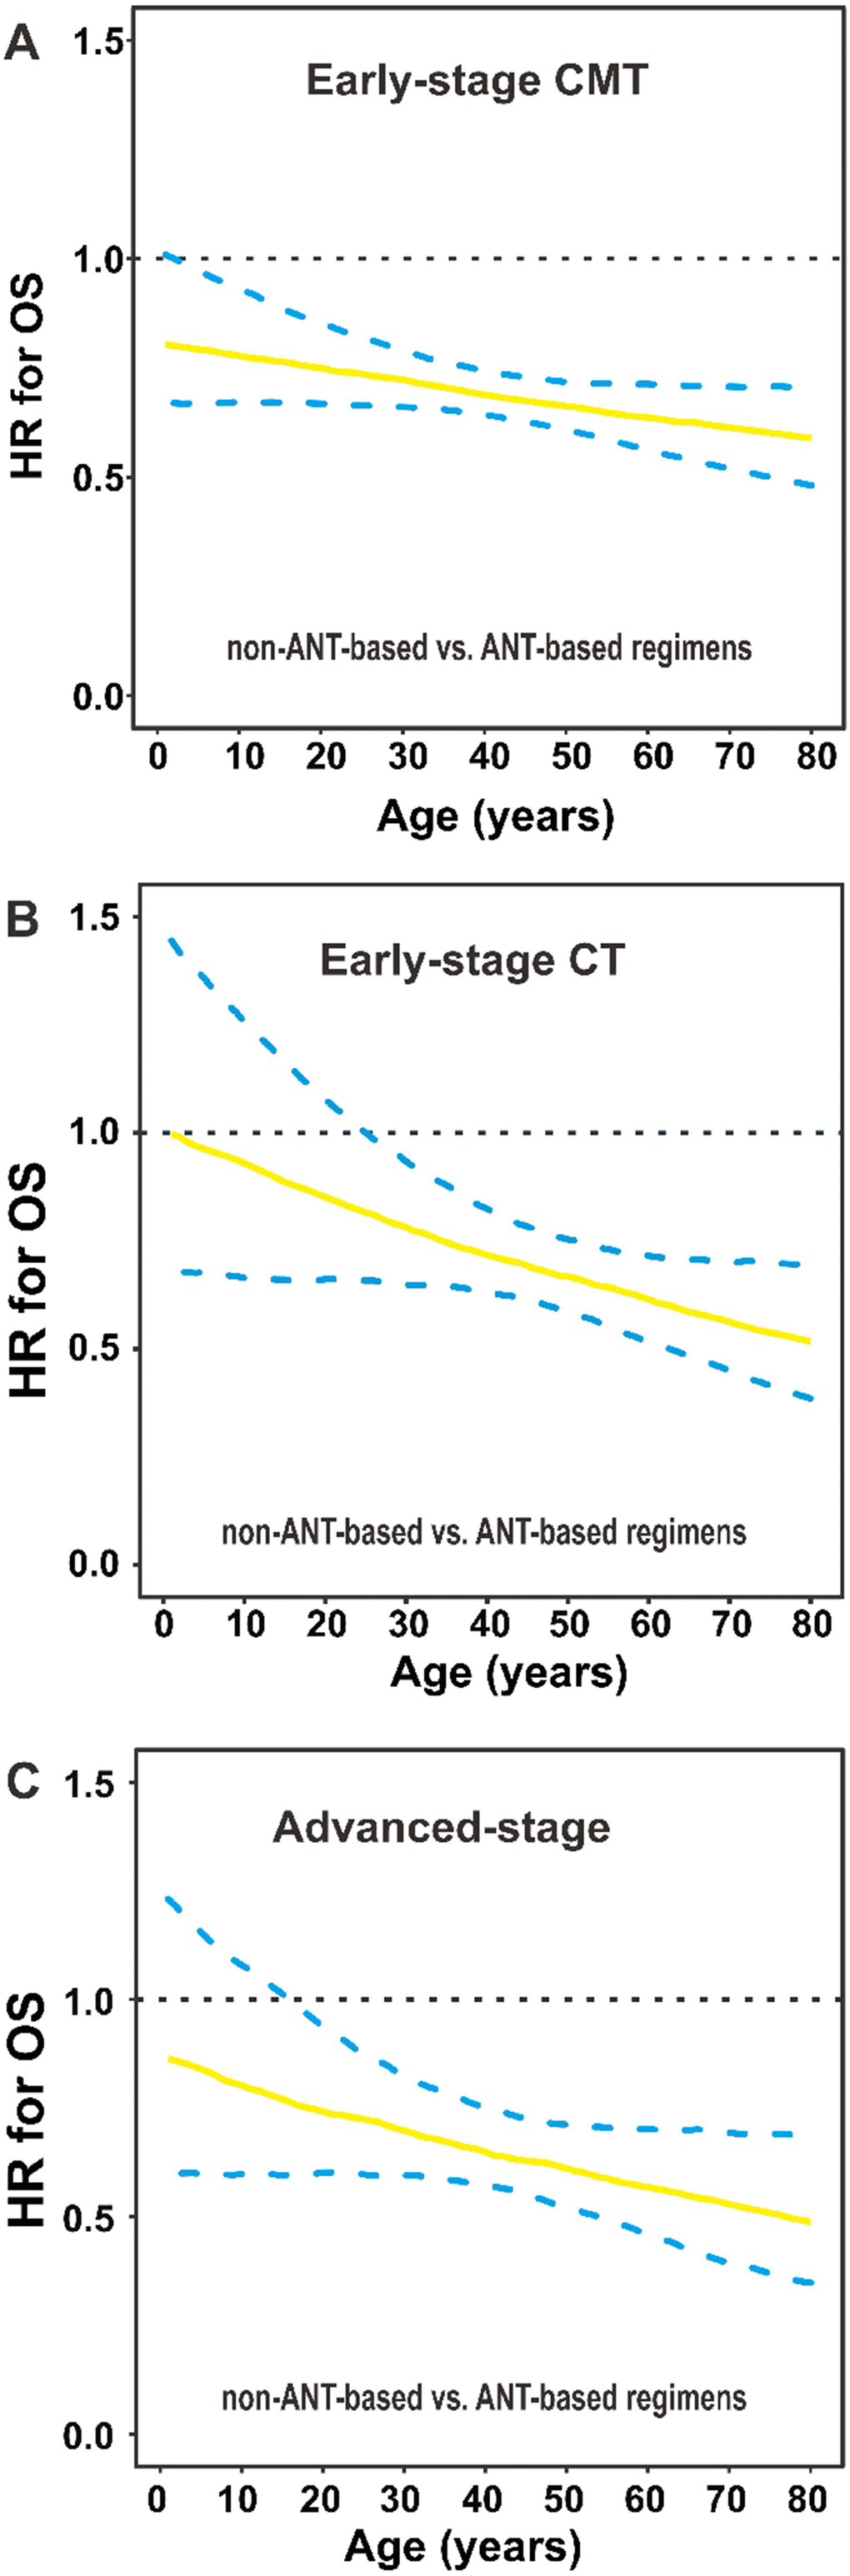 OS by chemotherapy regimens and age group. (A) HRs for OS are presented by non-ANT-based versus ANT-based regimens in early-stage patients who received (A) CMT or (B) CT, and (C) in advanced-stage patients. The solid line represents the HR estimate, and dashed lines represent 95% CIs. OS, overall survival; HR, hazard ratio; ANT, anthracycline; CMT, combined modality therapy; CT, chemotherapy; CI, confidence interval.